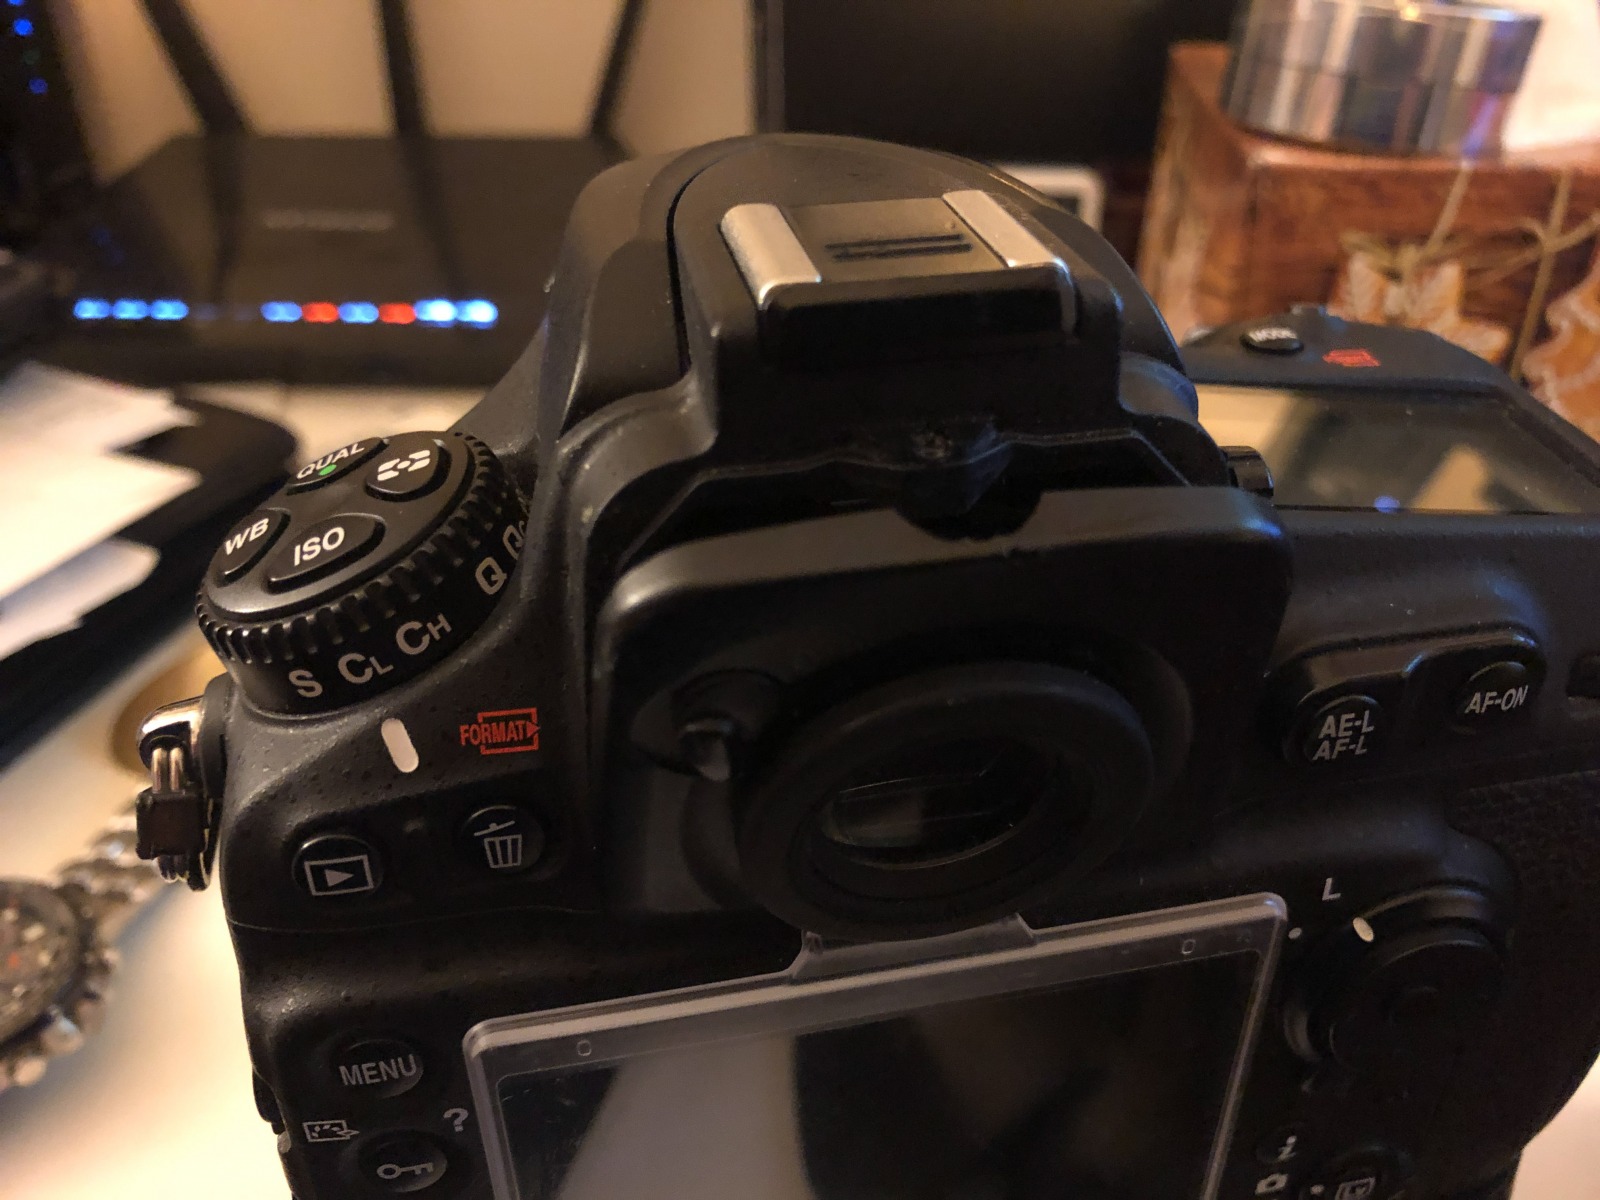 From the “The D810 Is Out of Surgery And Doing Well” Dept: